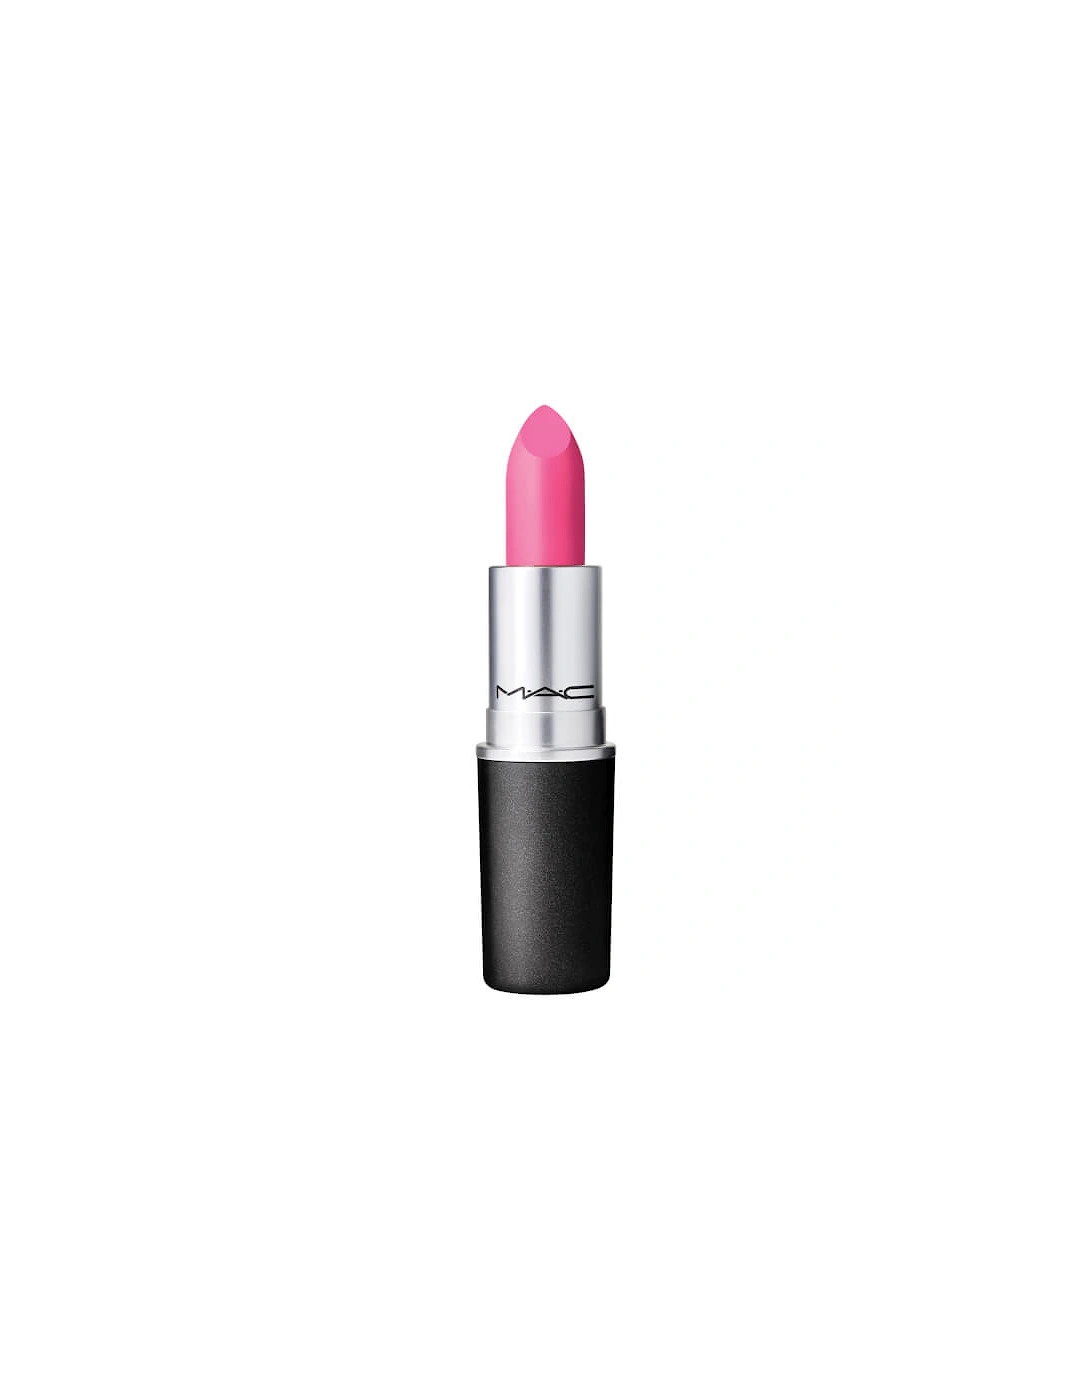 Amplified Crème Lipstick Re-Think Pink - Do Not Disturb, 2 of 1